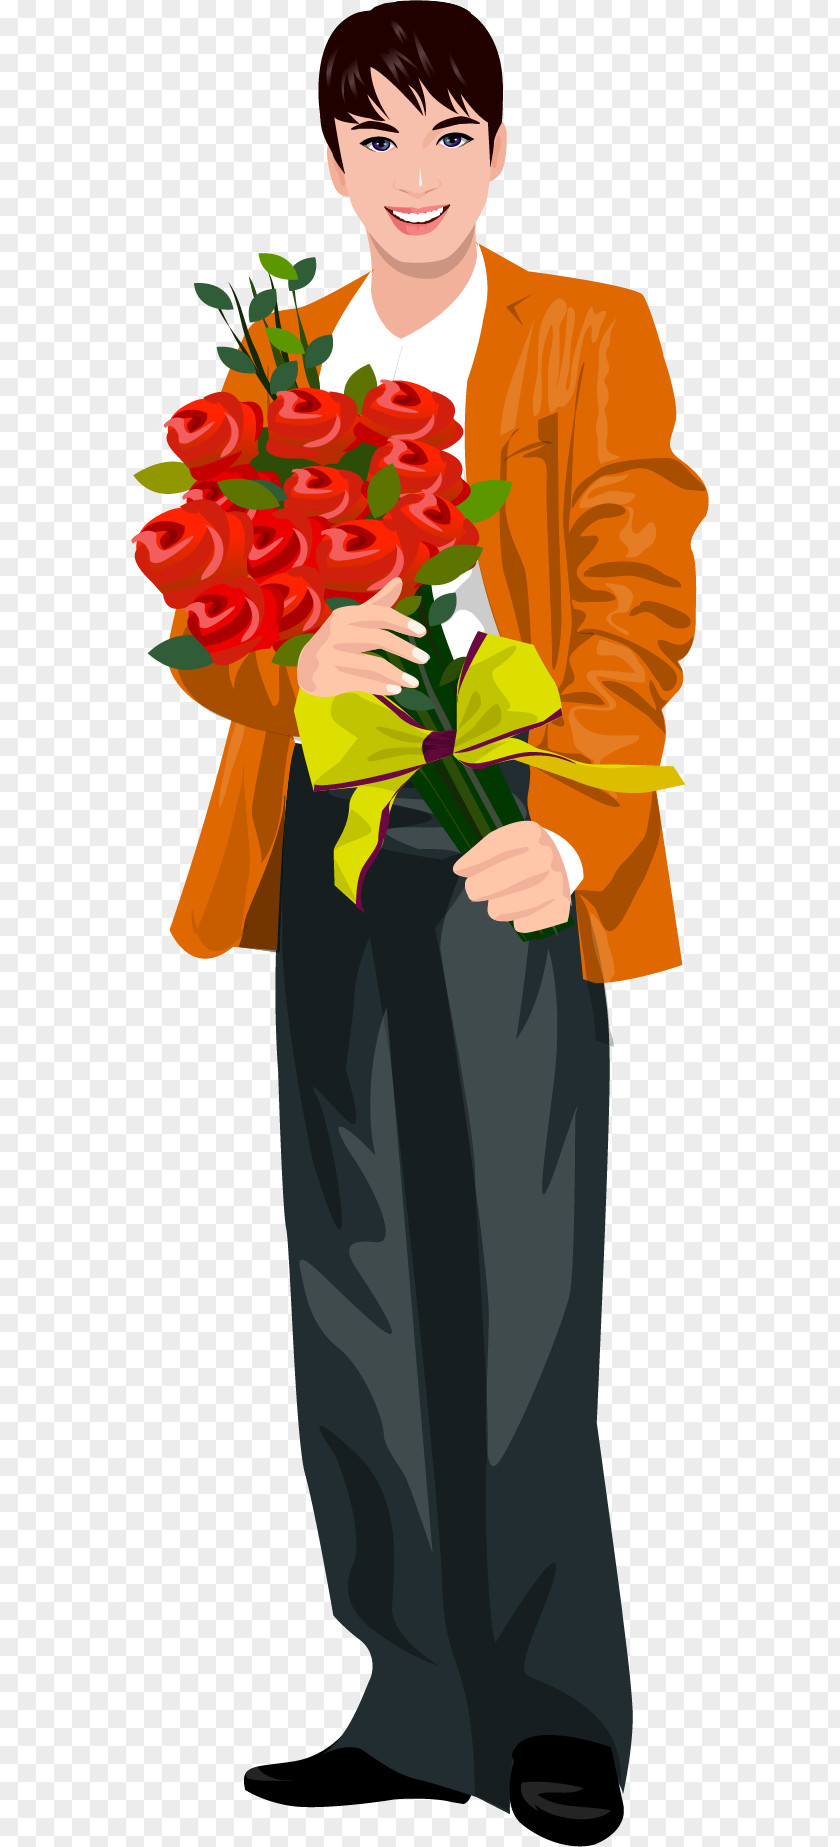 Vector Painted Man Holding Flower Bouquet Illustration PNG